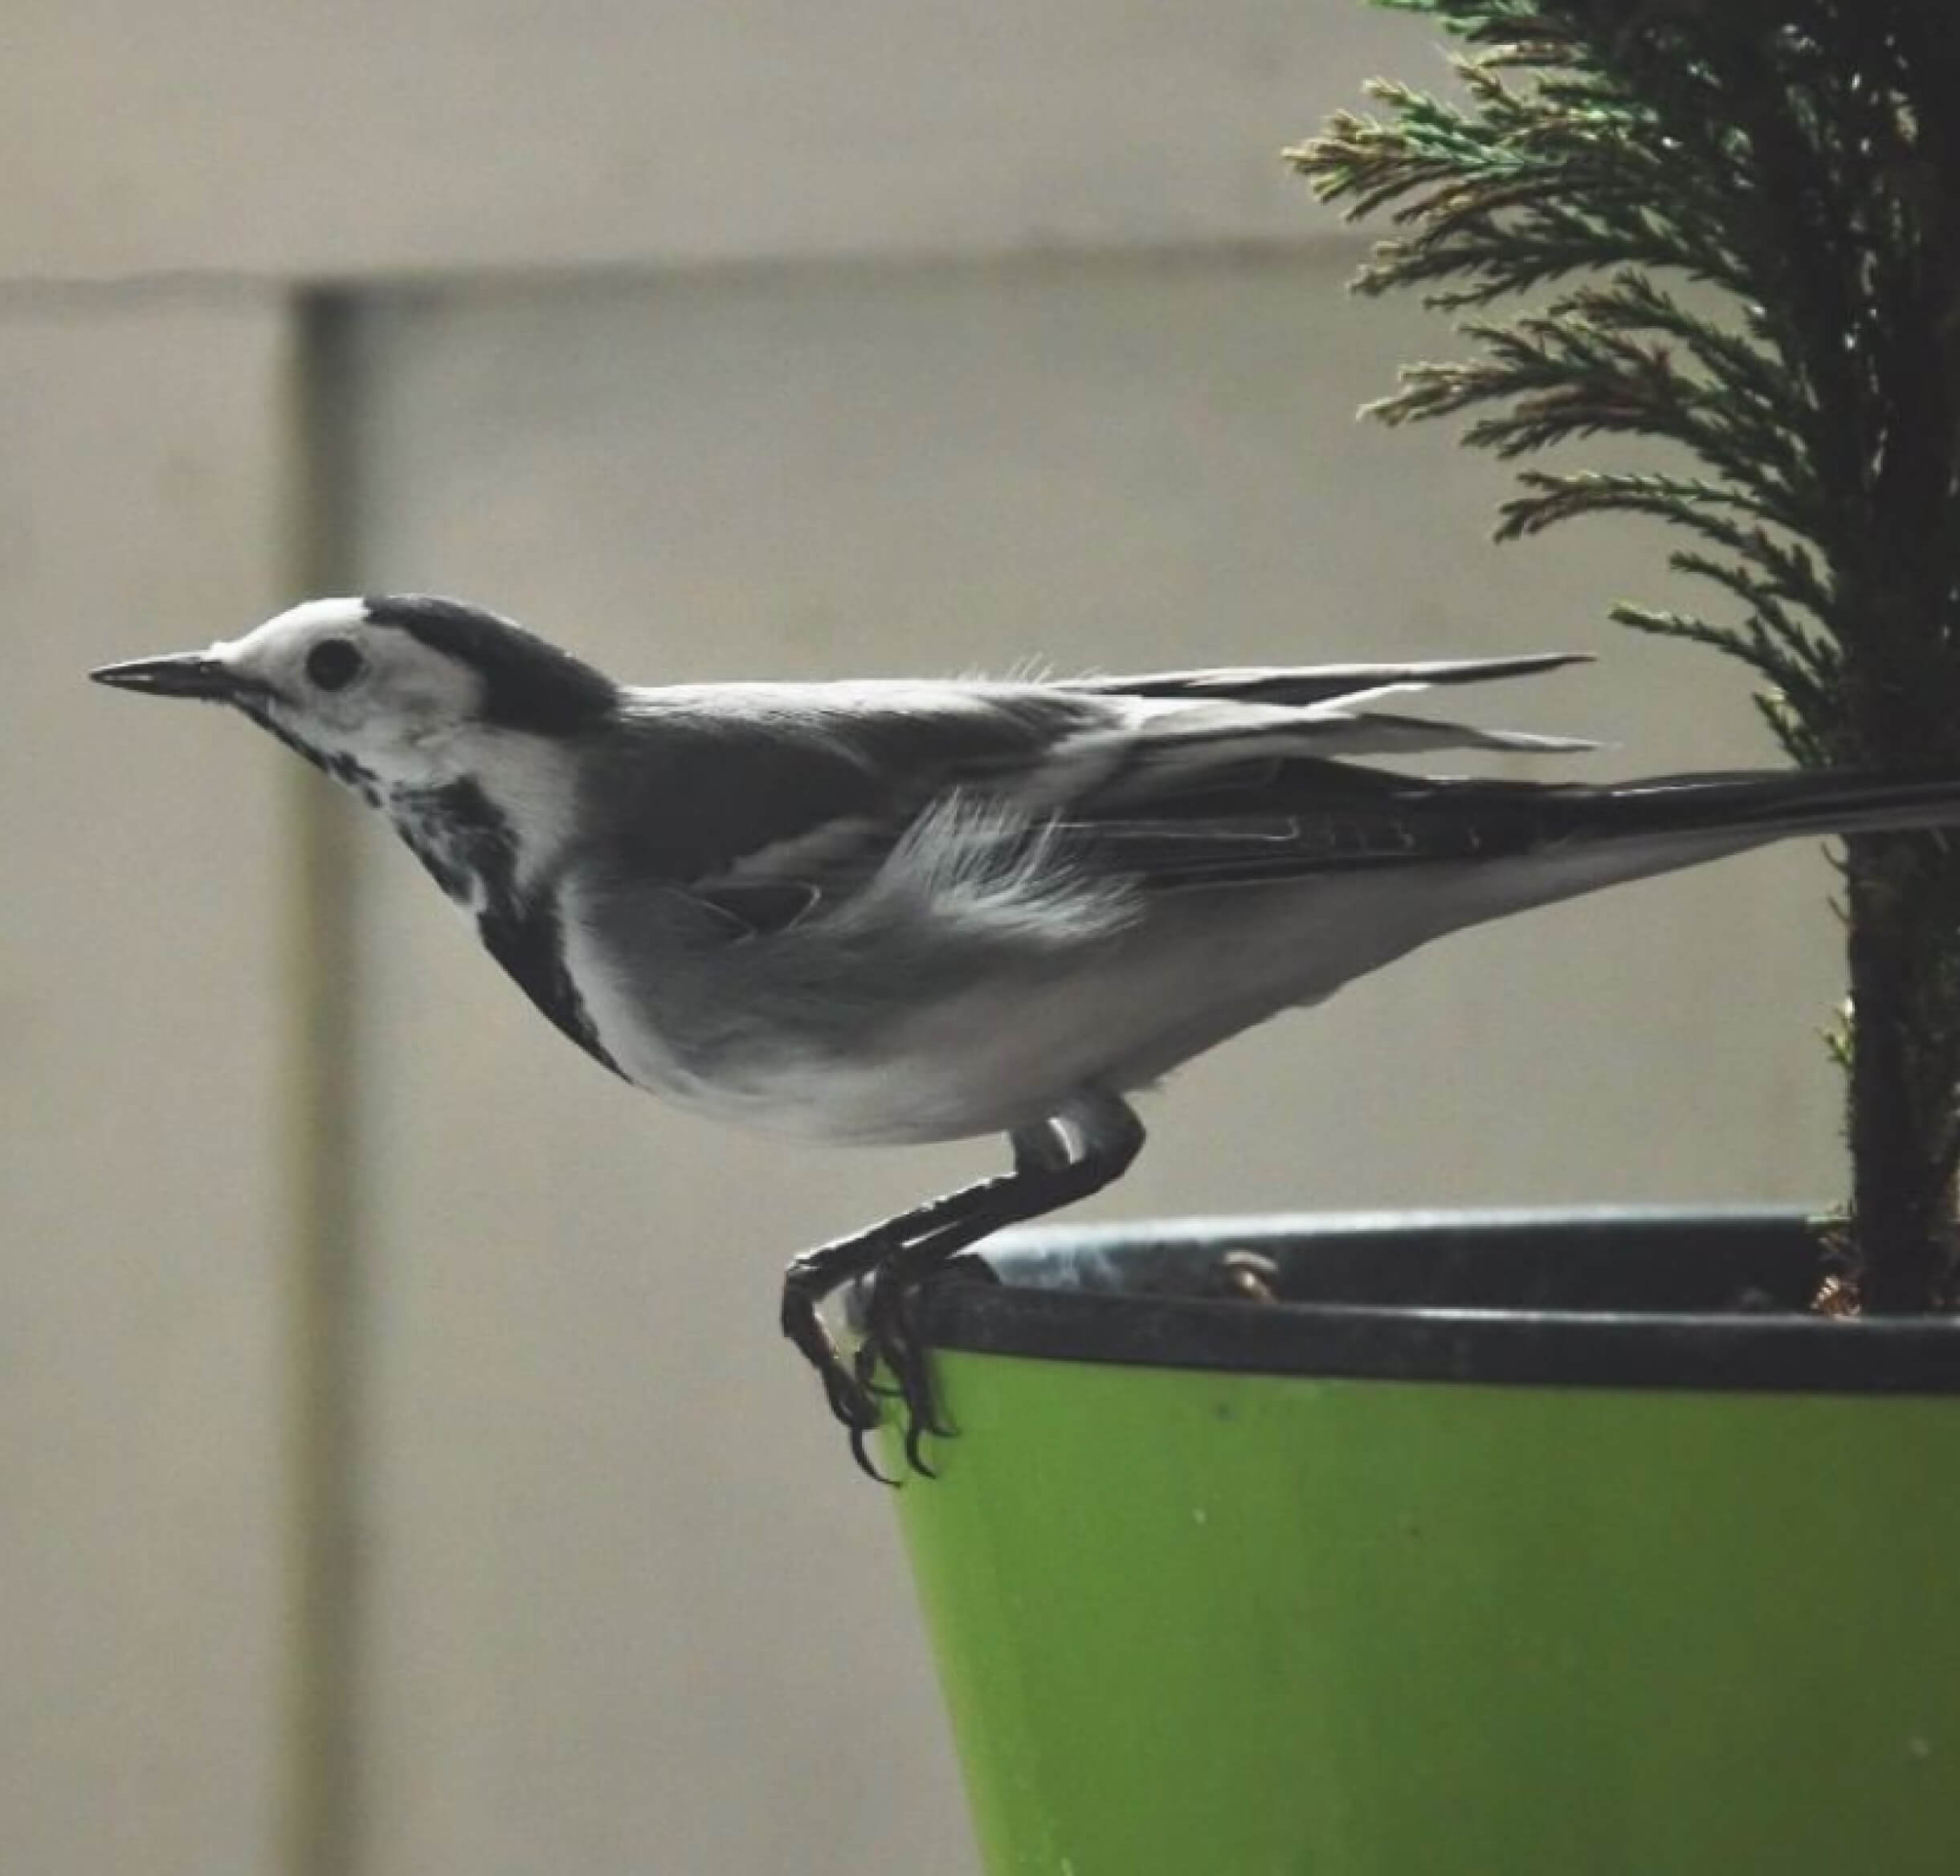 Bird sits on a flower pot and is ready to fly away